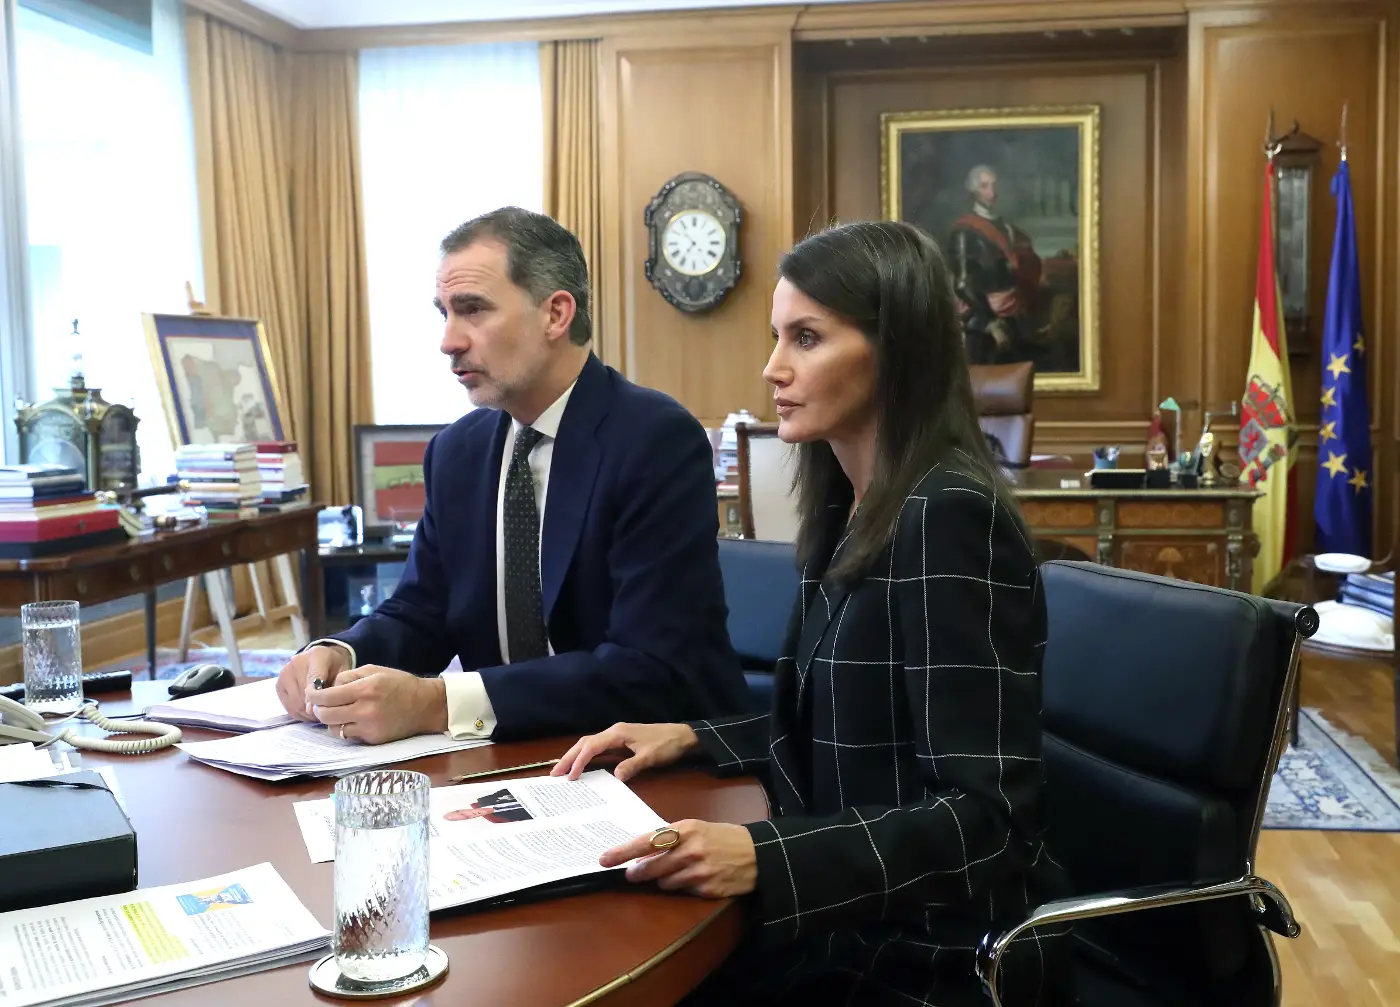 Felipe and Letizia held a video conference with the Medical associal